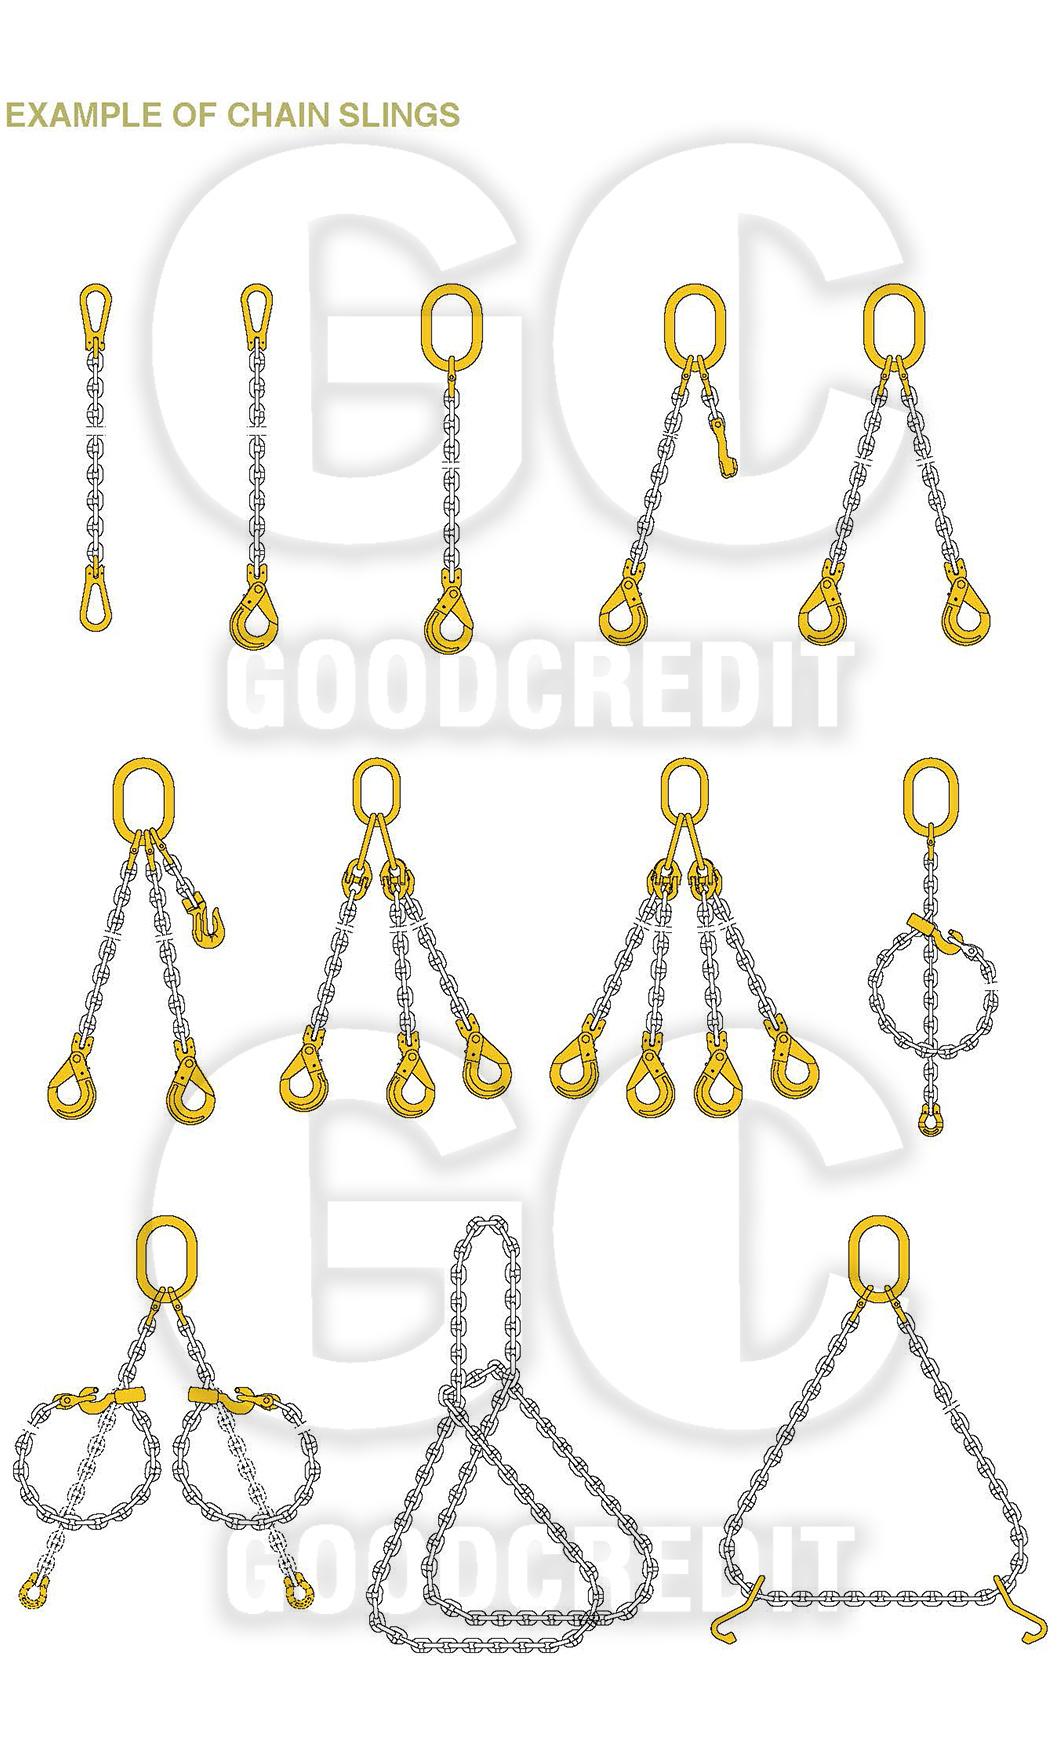 Yellow Zinc Grade 70 Chain with Clevis Grab Hook G70 Binder Chain